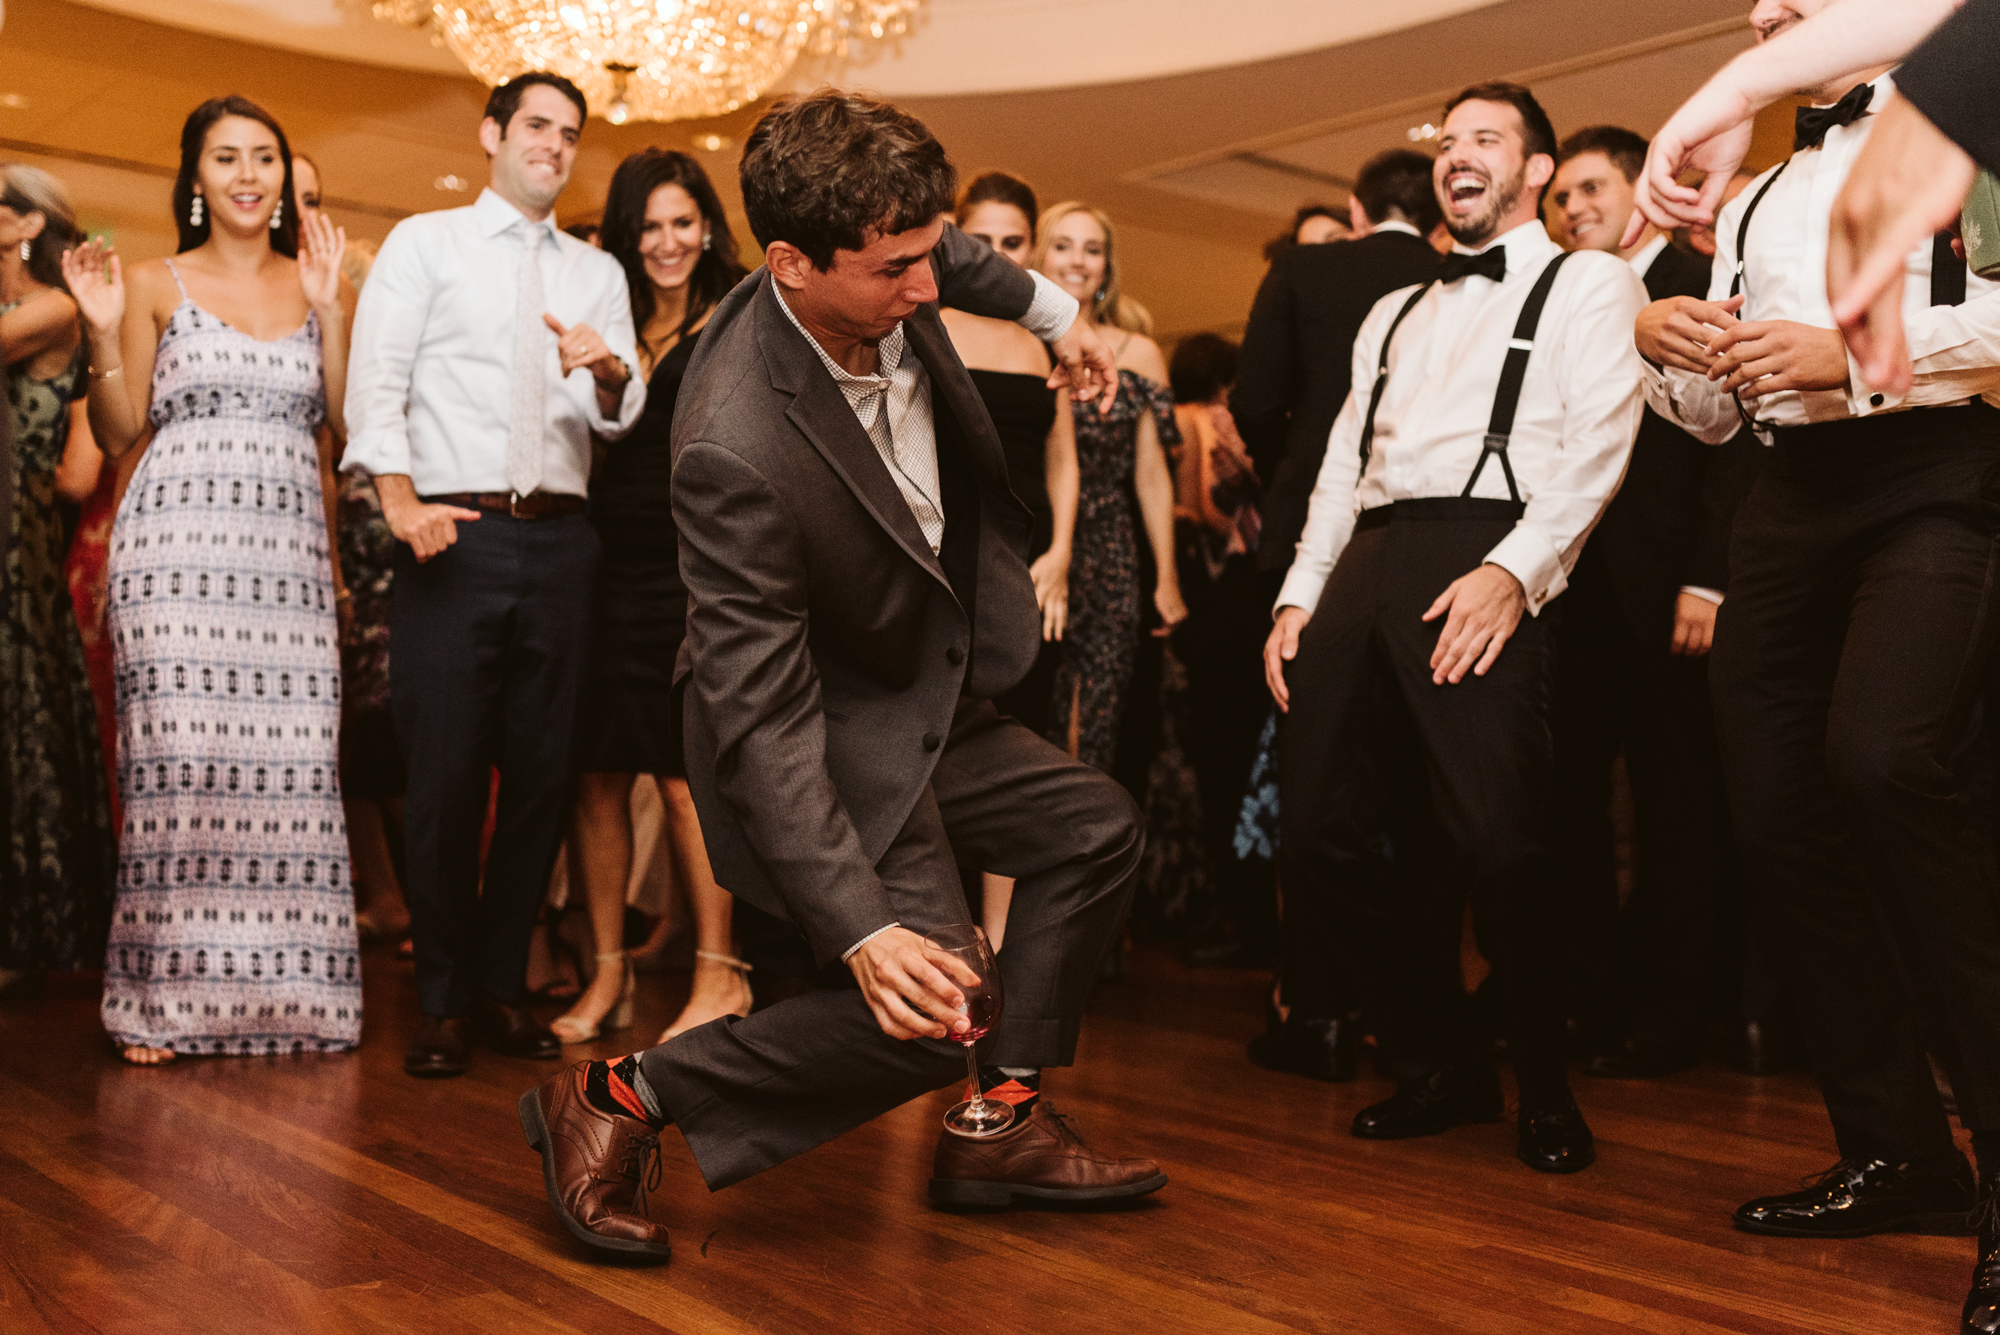 Elegant, Columbia Country Club, Chevy Chase Maryland, Baltimore Wedding Photographer, Classic, Traditional, Fun Dance Moves at Wedding Reception, Candid Photo